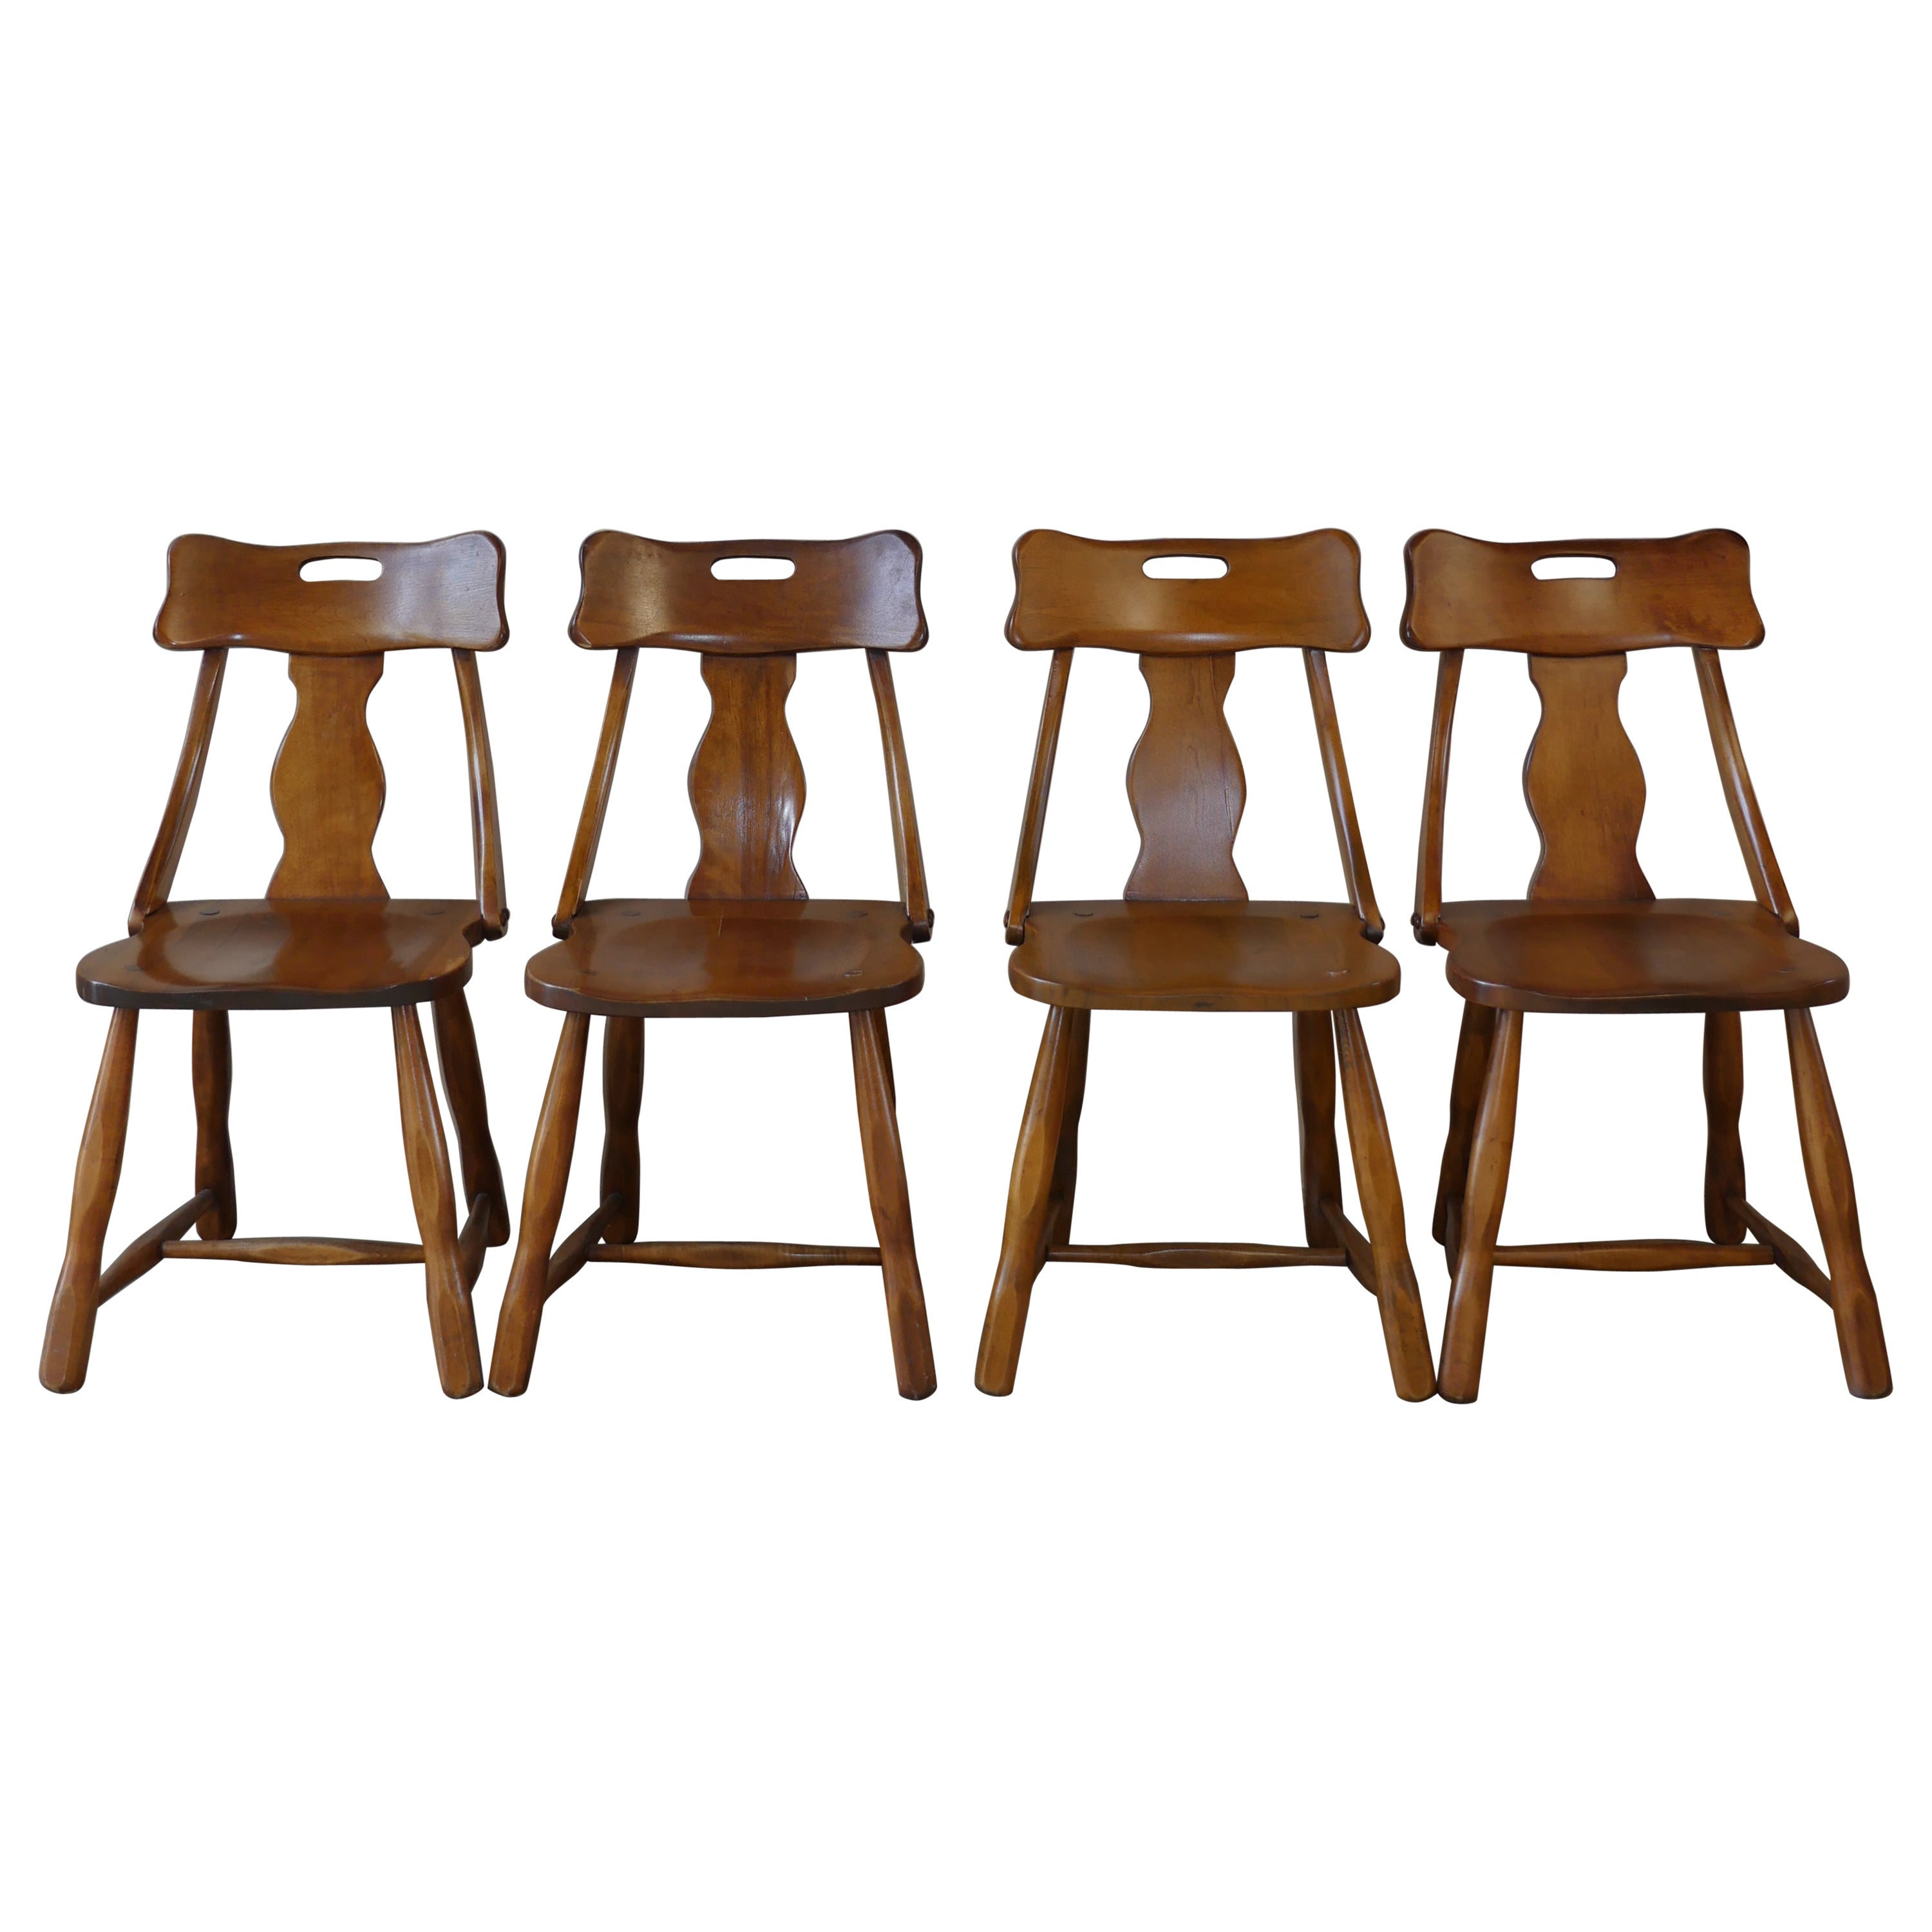 1950s Mid-Century Maple Wood Dining Chairs - Set of 4 